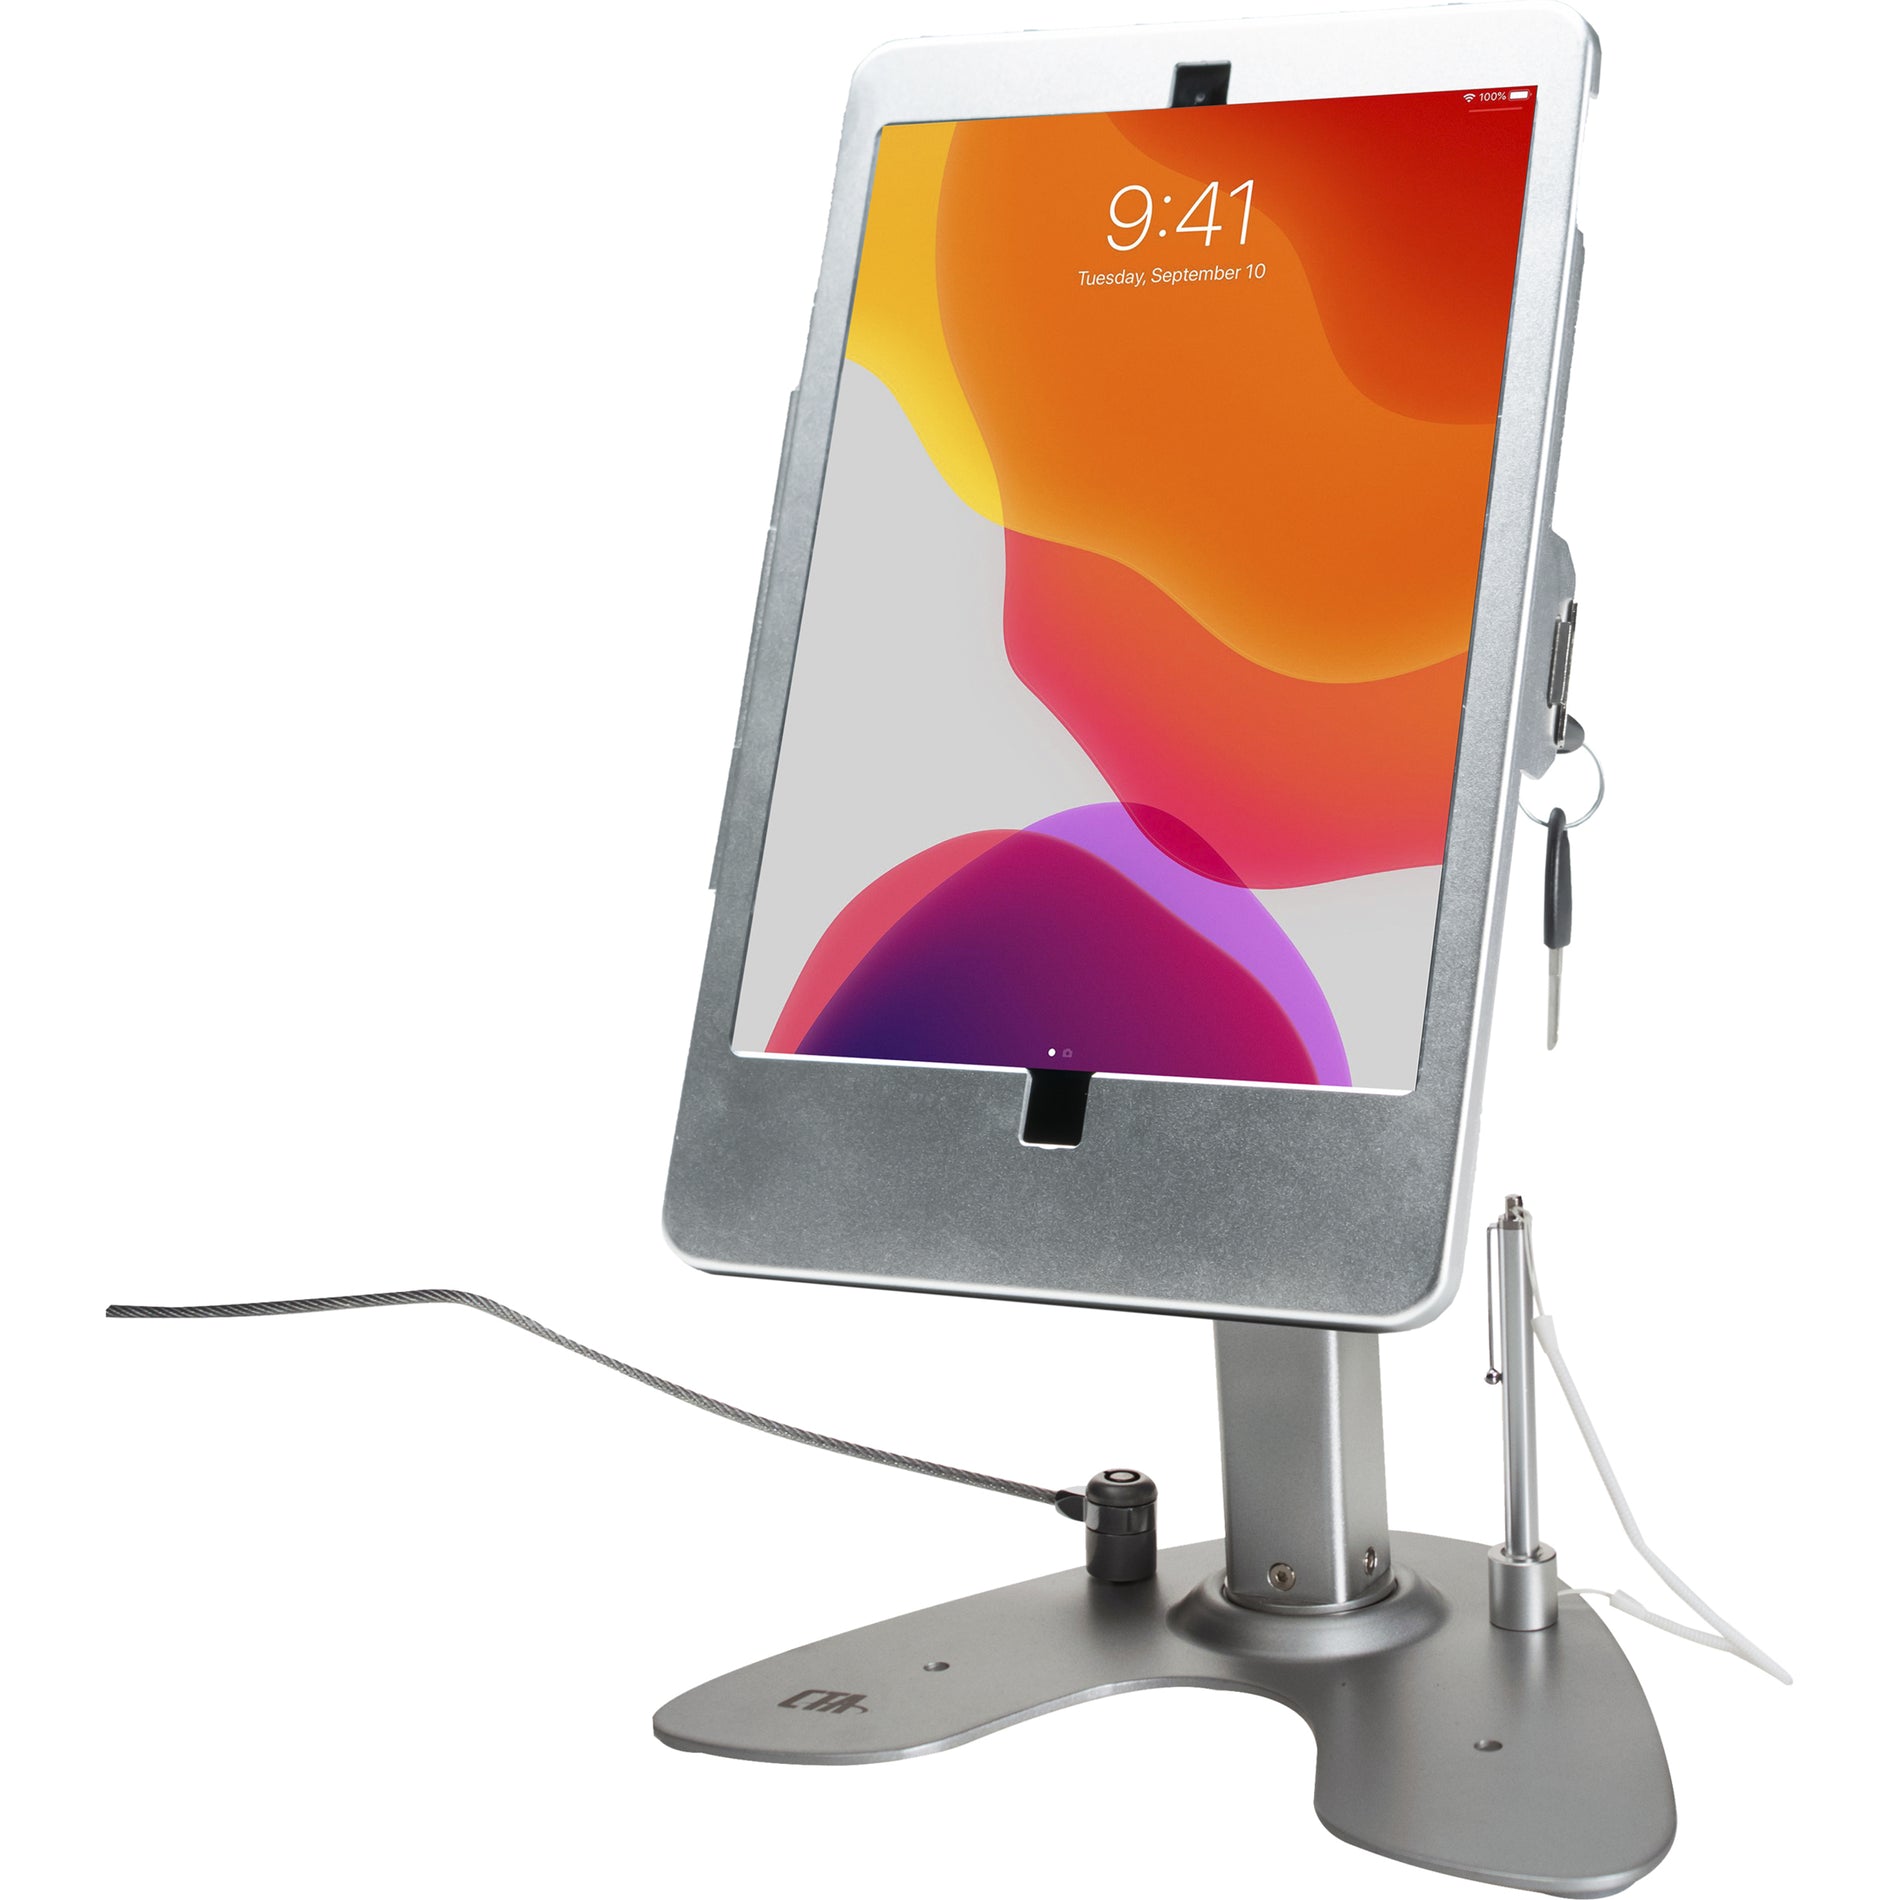 CTA Digital PAD-ASK10 Dual Security Kiosk Stand with Locking Case and Cable for iPad 10.2-Inch, Desk Mount